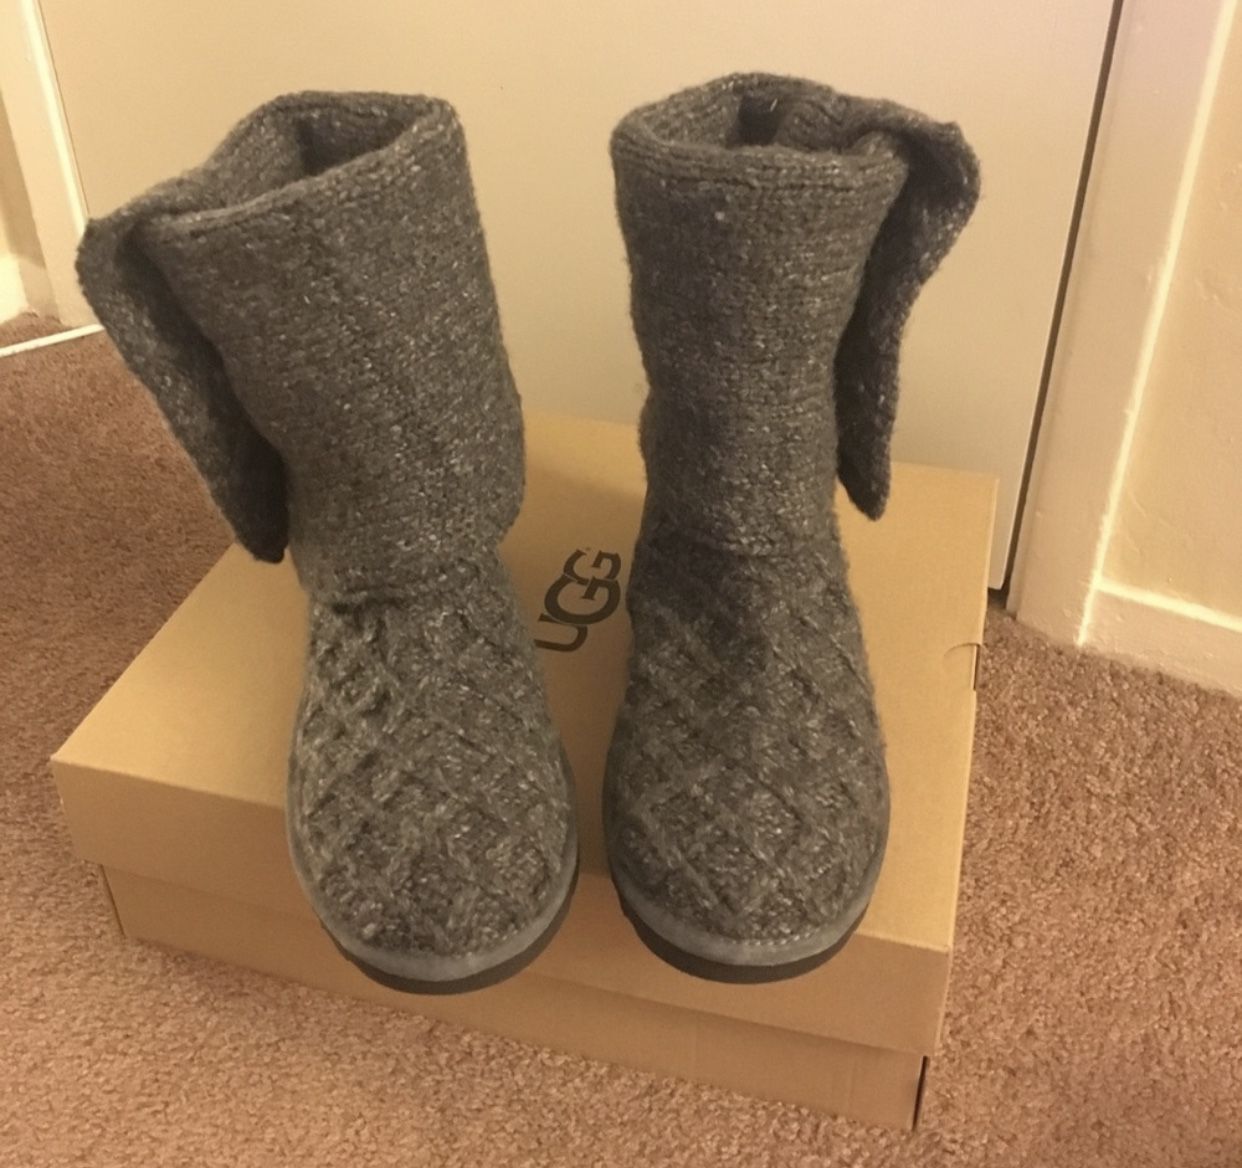 100% Authentic Brand New in Box UGG Lattice Cardy Knit Boots / Women Size 6 and Women Size 11 available / Color Grey